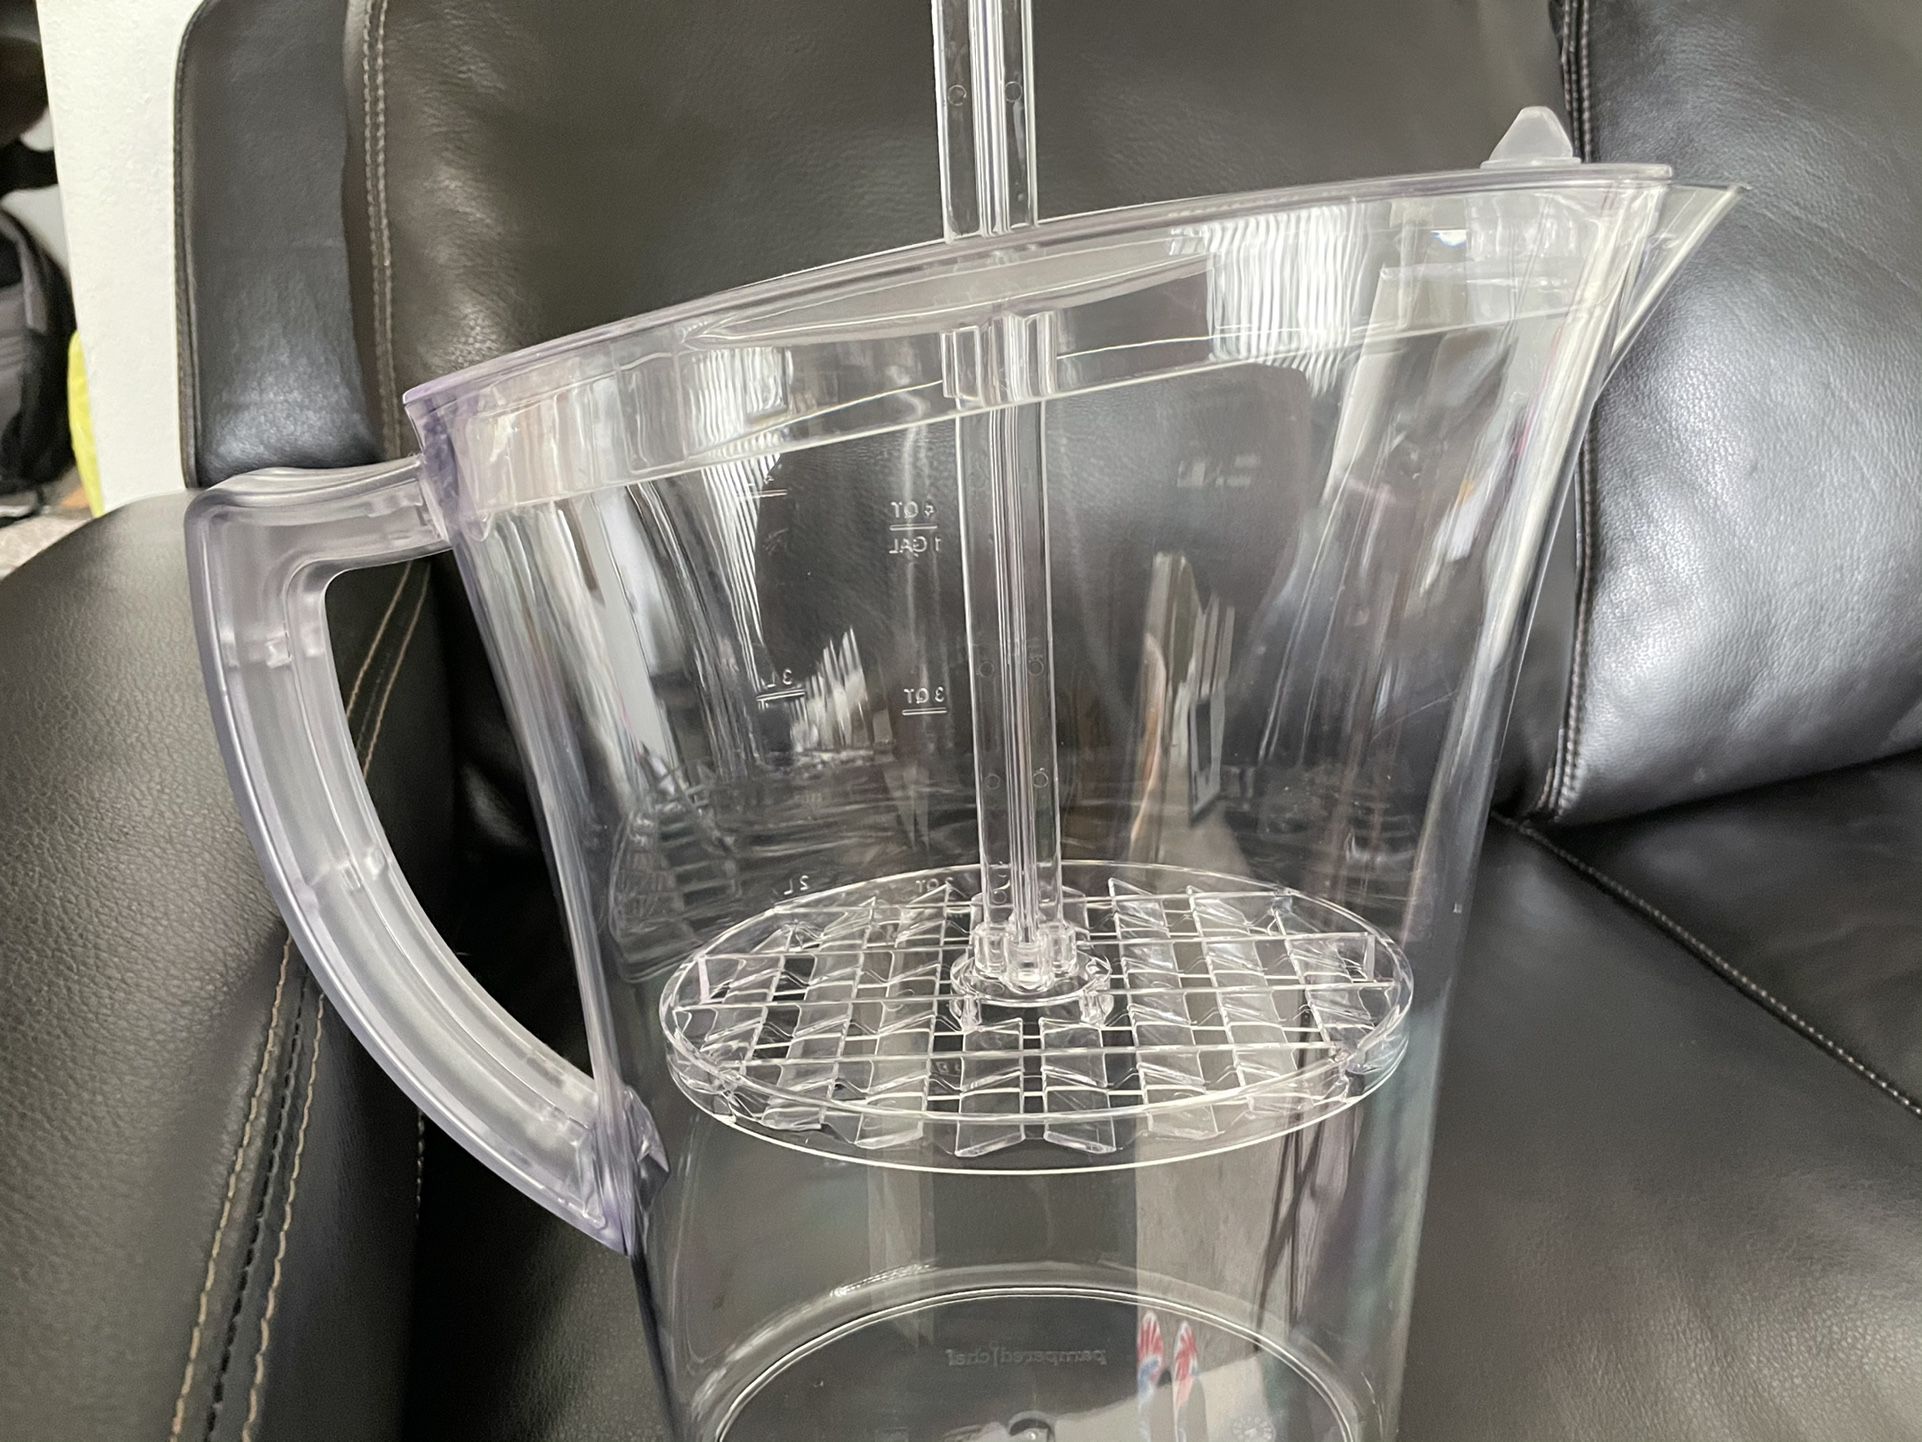 Pampered Chef Pitcher with Quick-Stir for Sale in Orland Park, IL - OfferUp